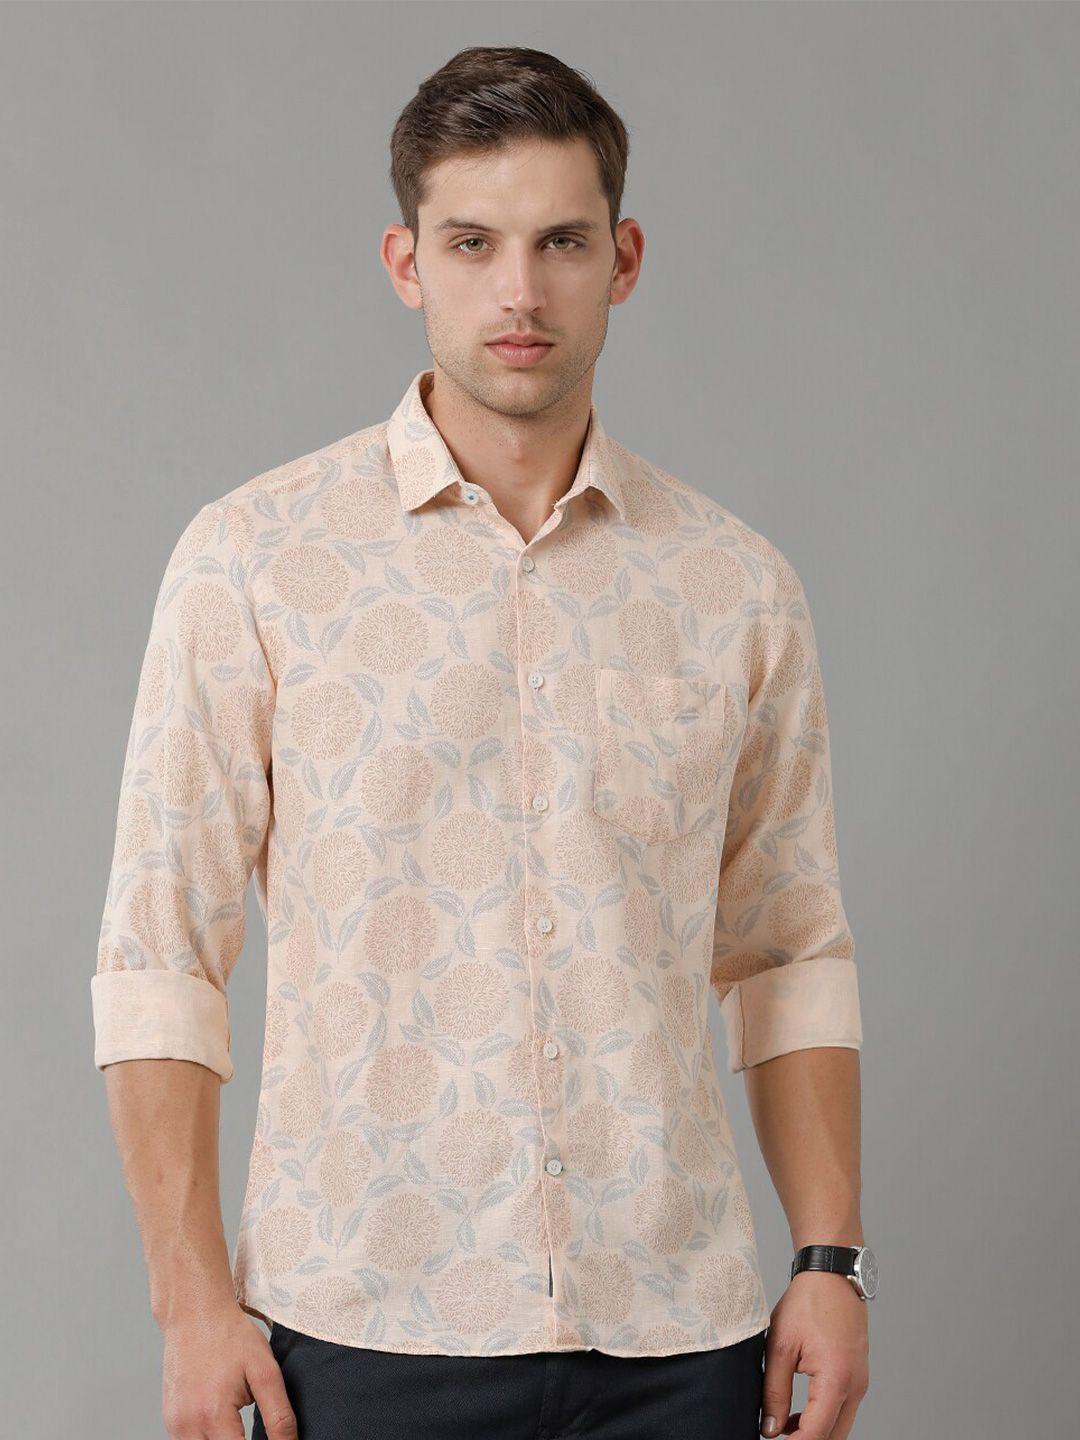 linen-club-contemporary-floral-printed-pure-linen-casual-shirt